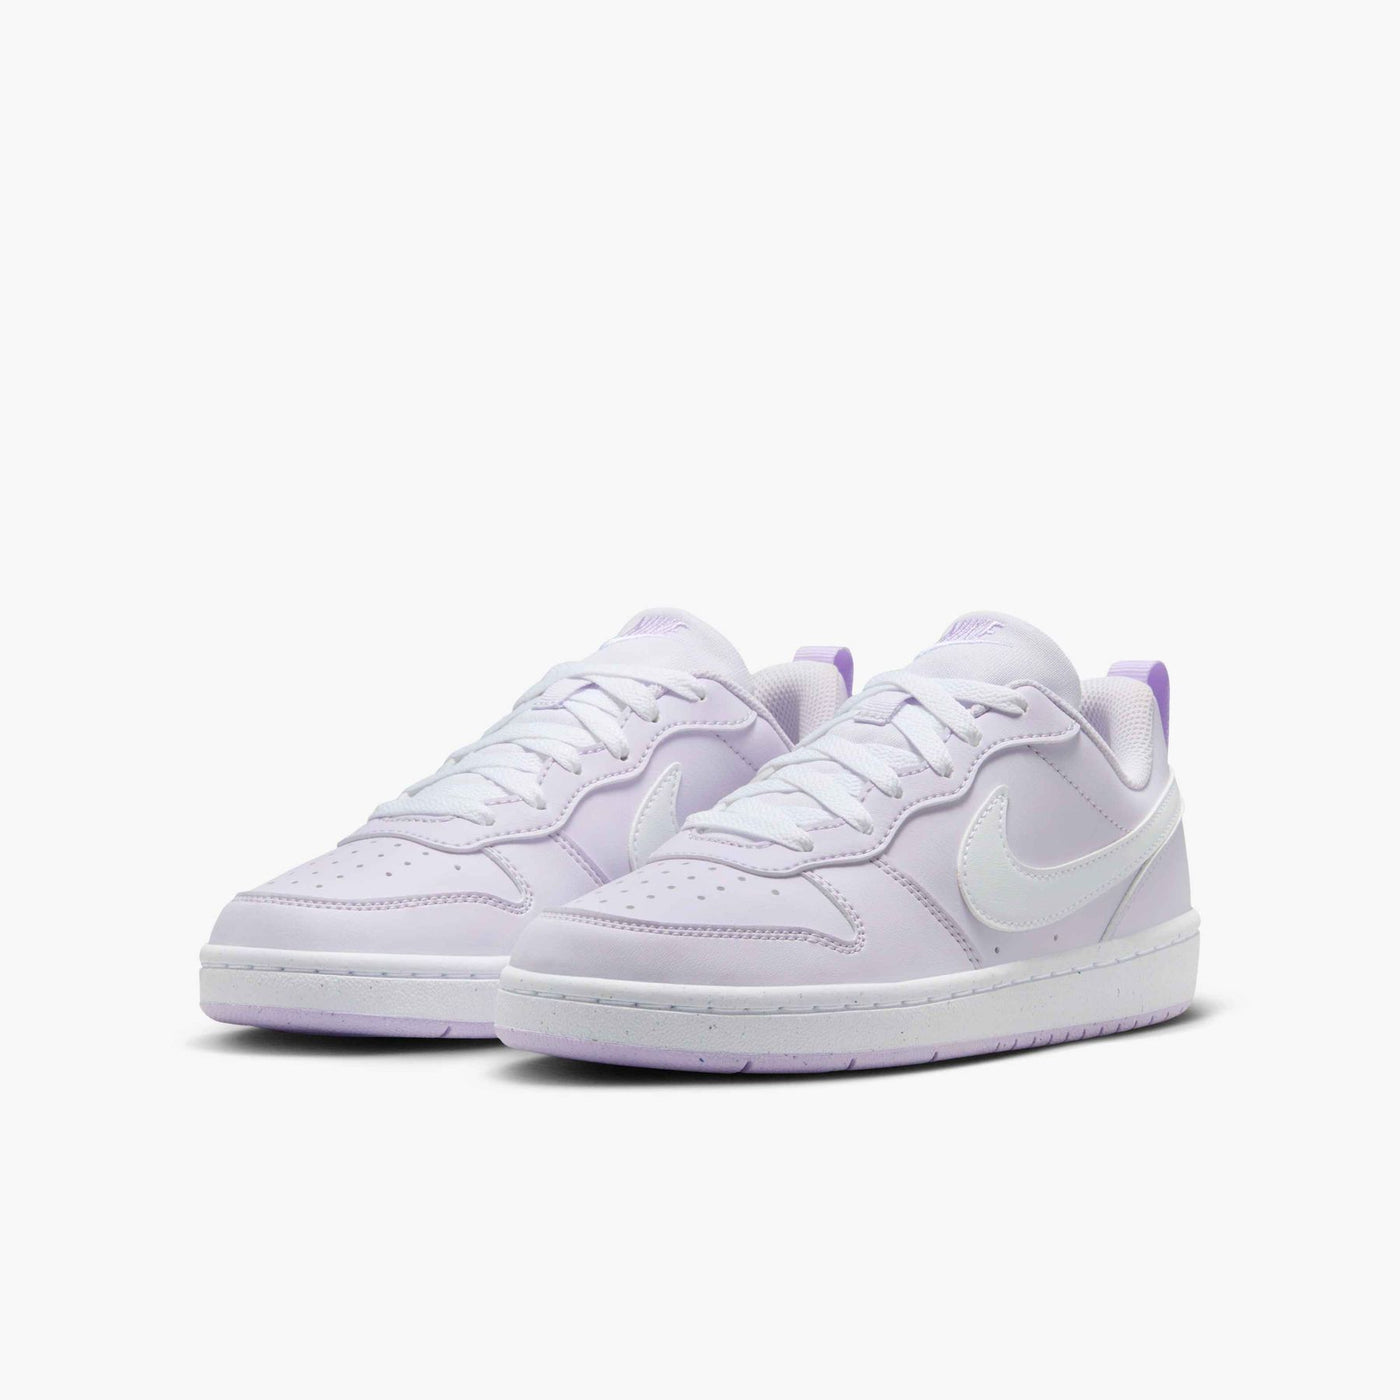 SNEAKERS NIKE COURT BOROUGH LOW RECRAFT DONNA